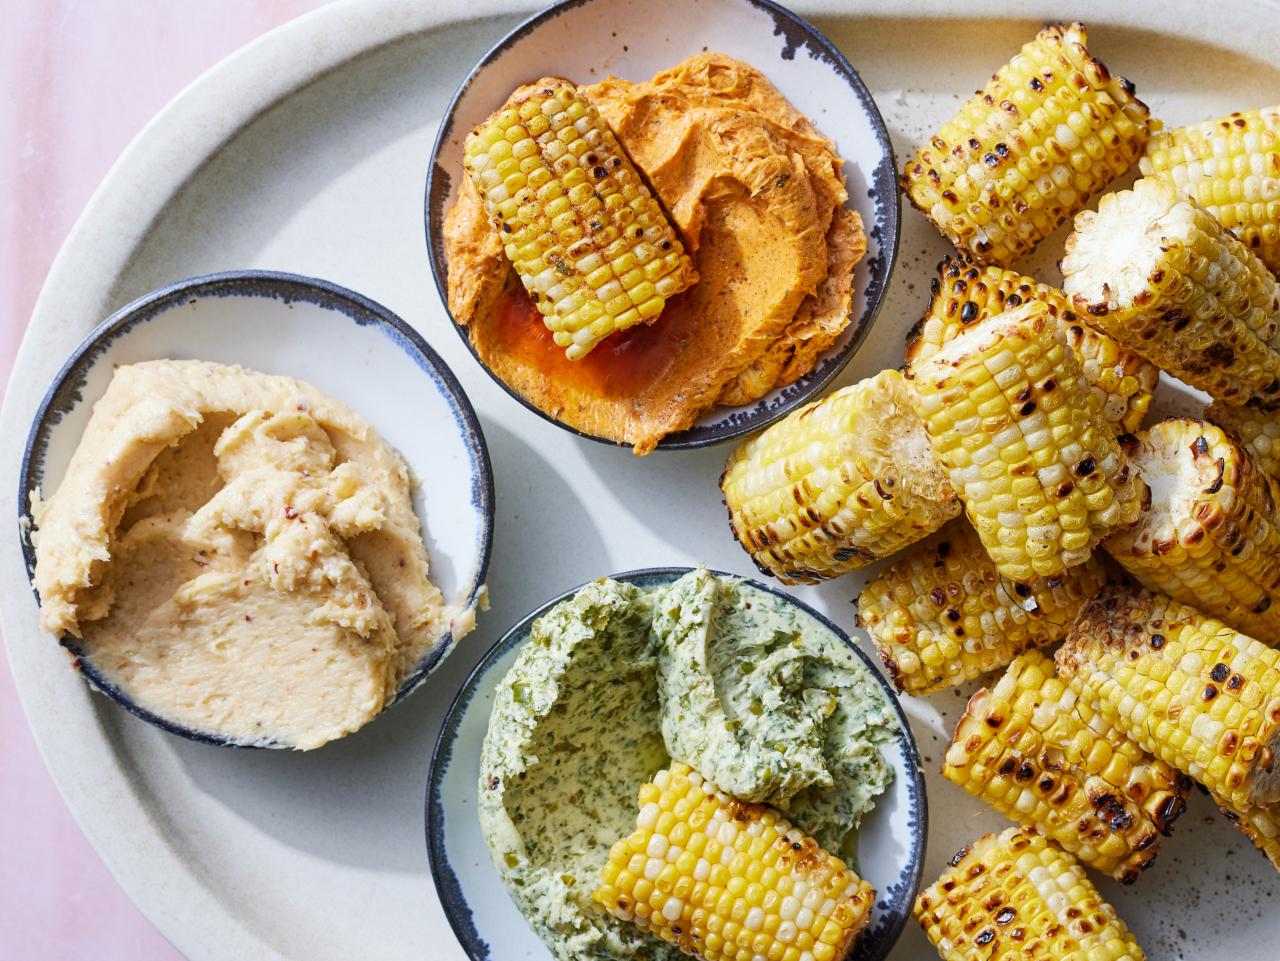 https://food.fnr.sndimg.com/content/dam/images/food/fullset/2023/5/16/fnk_GRILLED_CORN_AND_THREE_FLAVORED_BUTTER_BOARD_s4x3.jpg.rend.hgtvcom.1280.960.suffix/1684262642622.jpeg